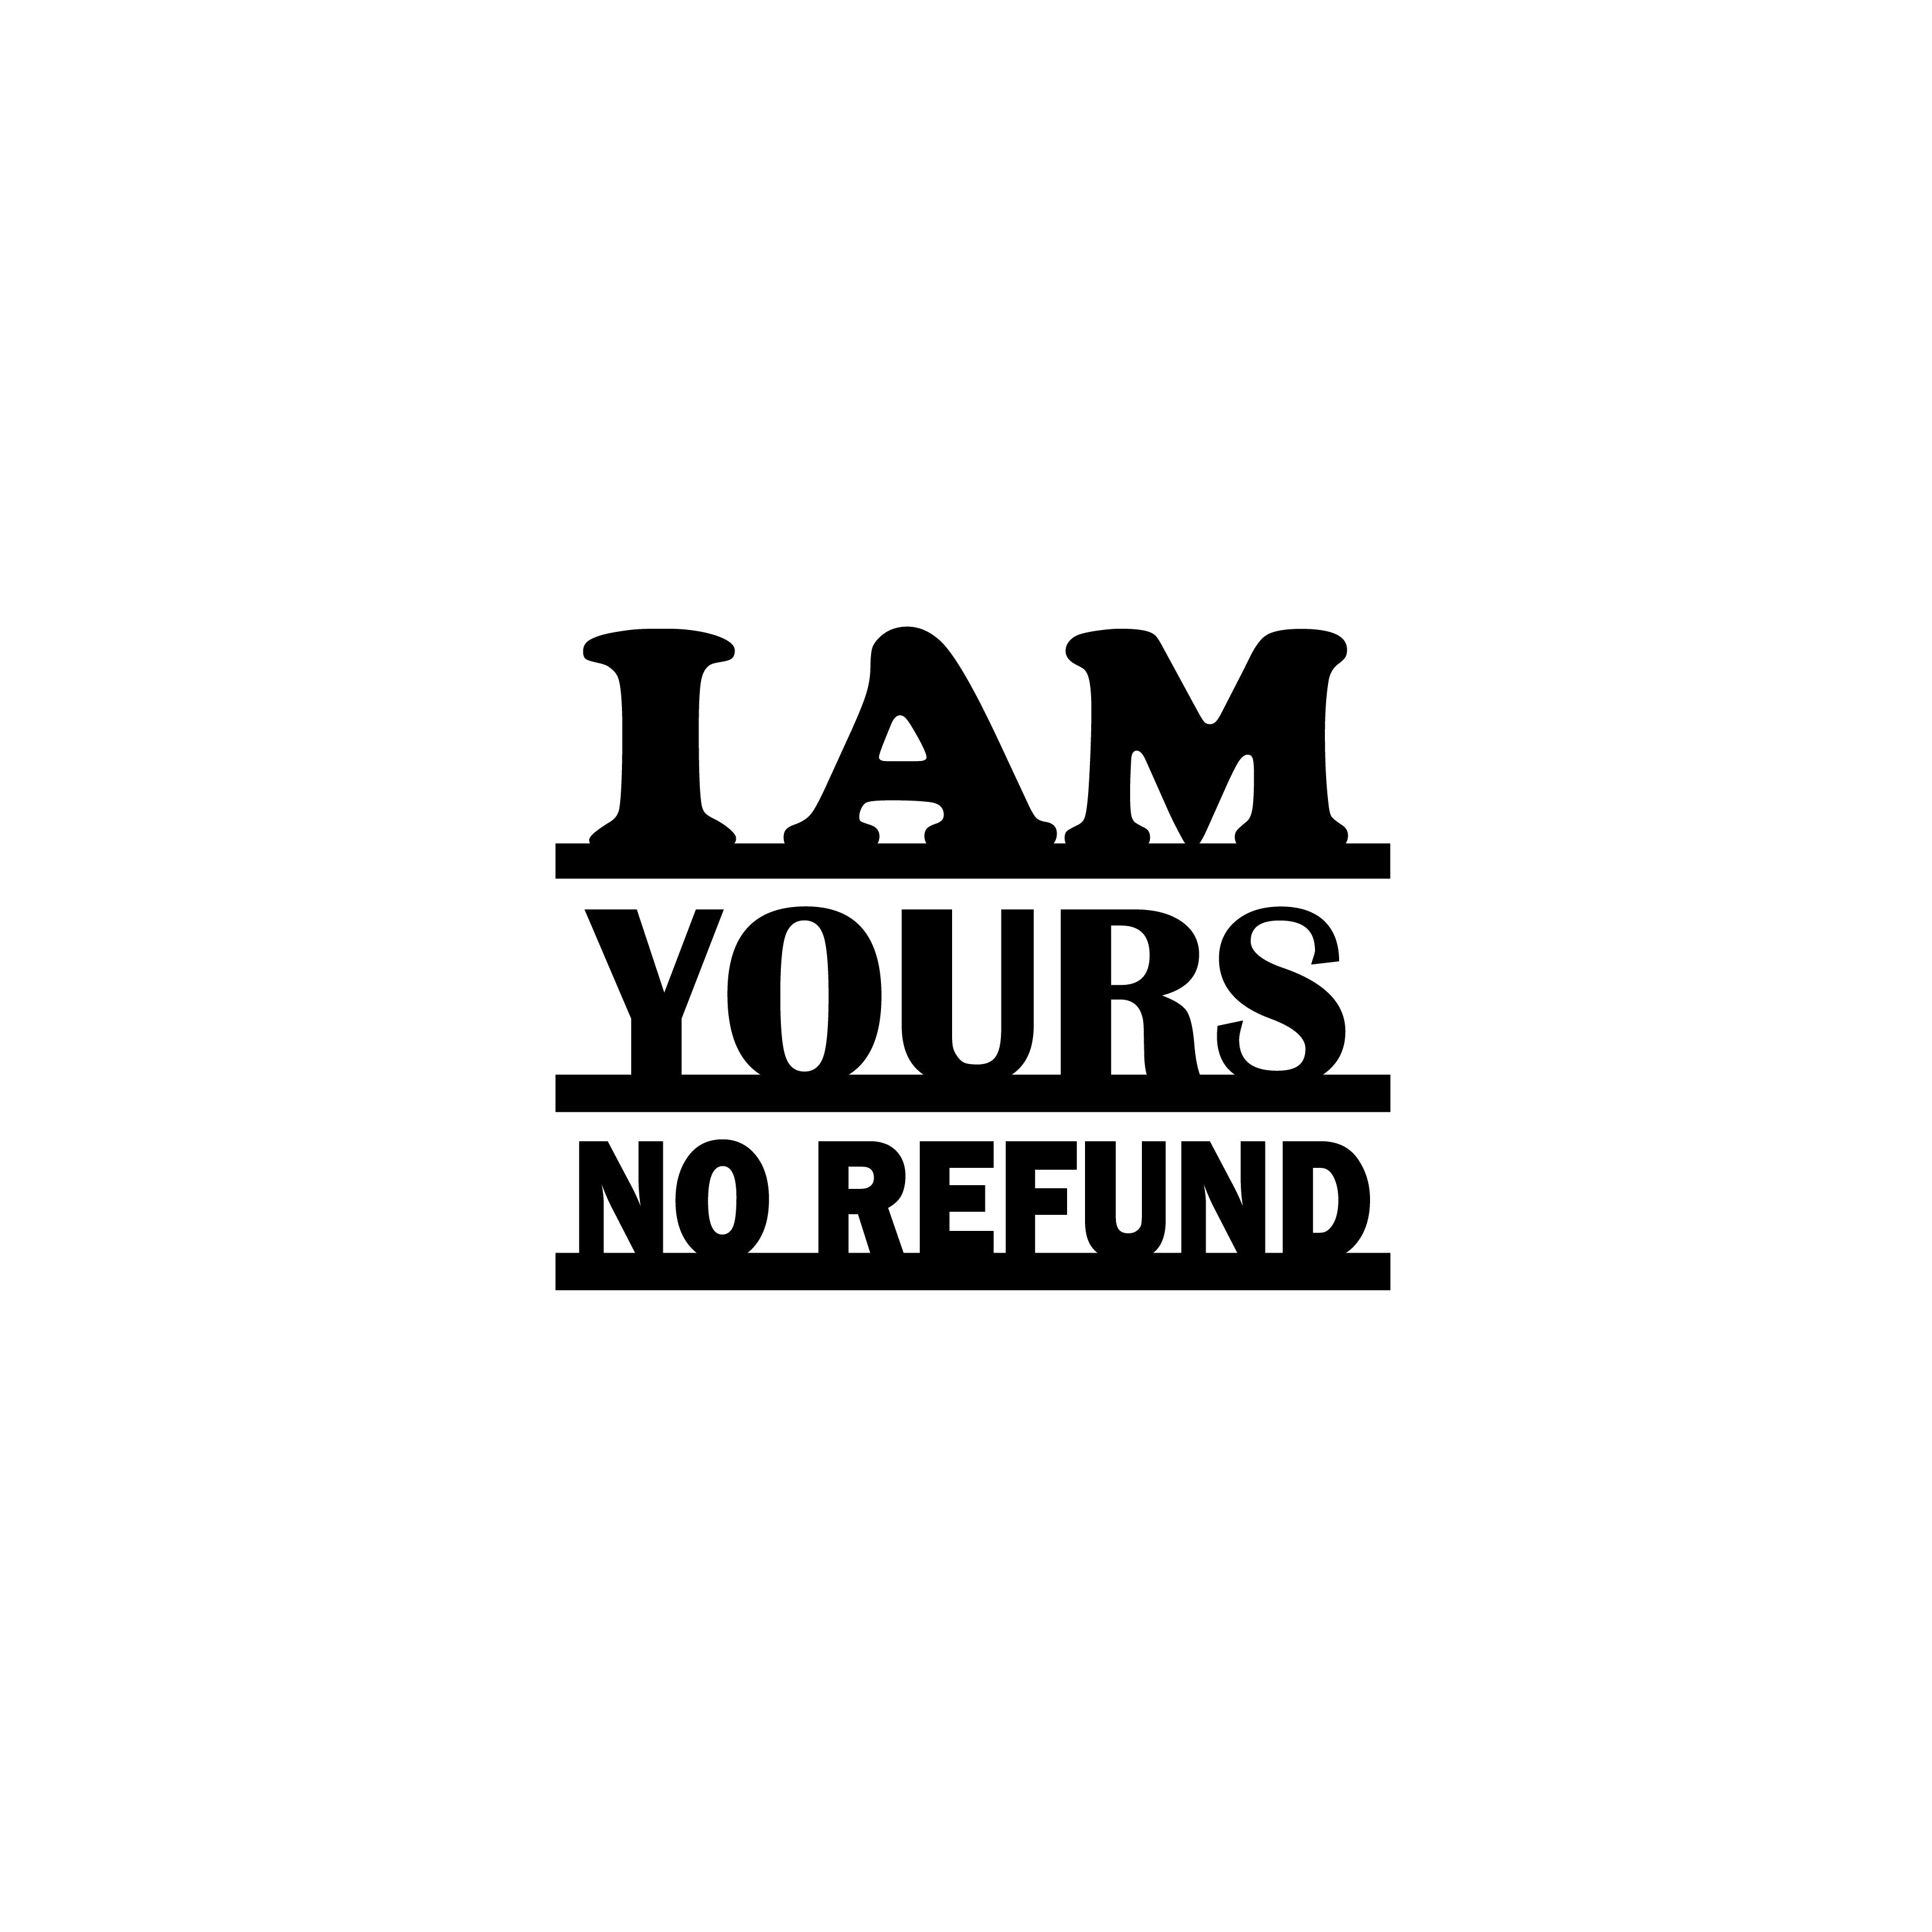 I Am Yours No Refund Black Engineered Wood Wall Art Cutout, Ready To Hang Home Decor 2